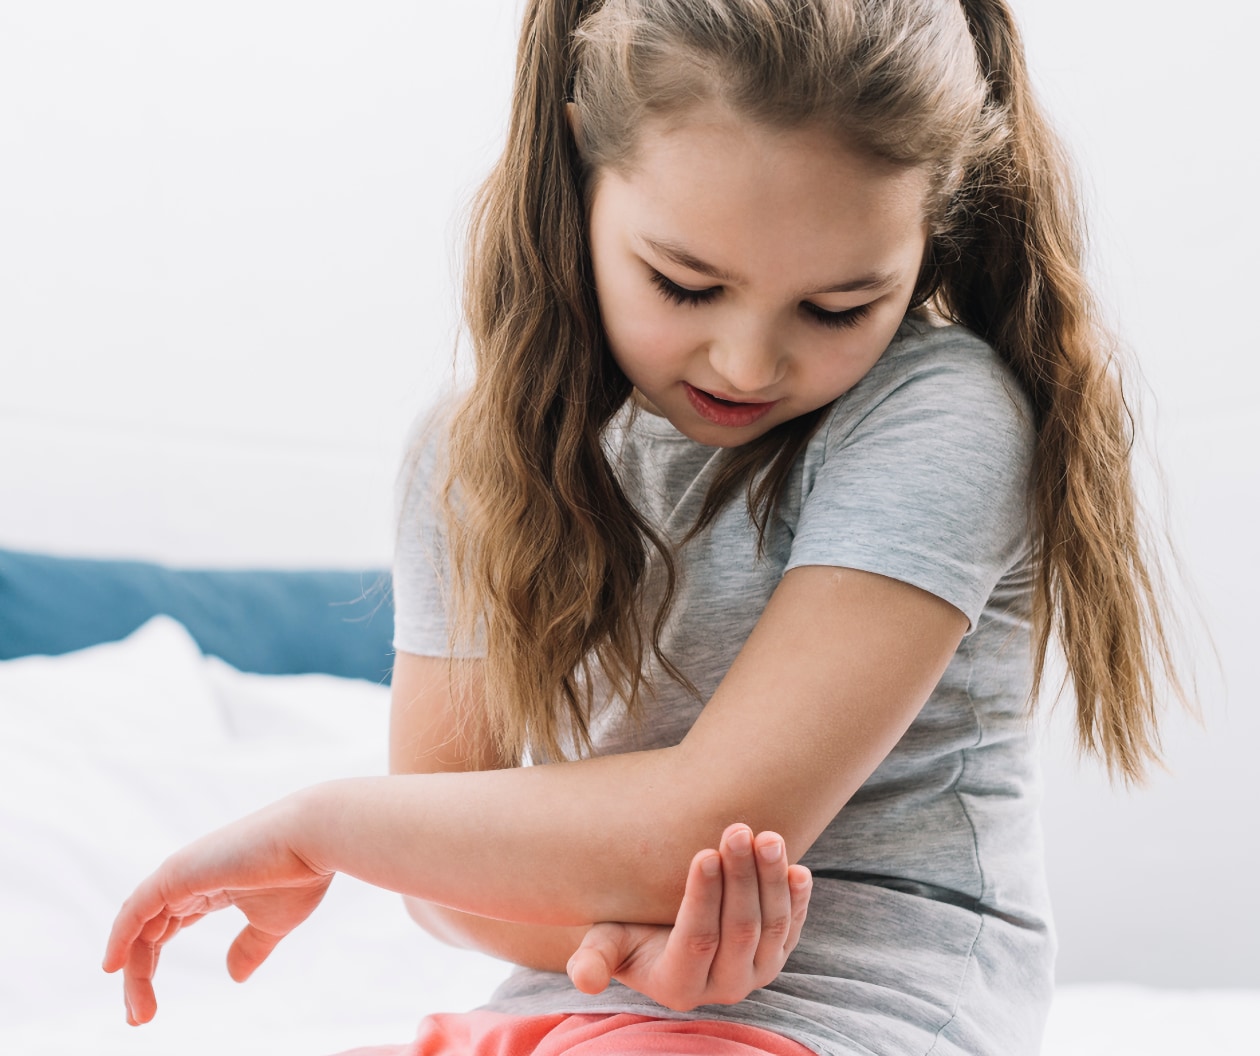 Image of a child holding her injured hand